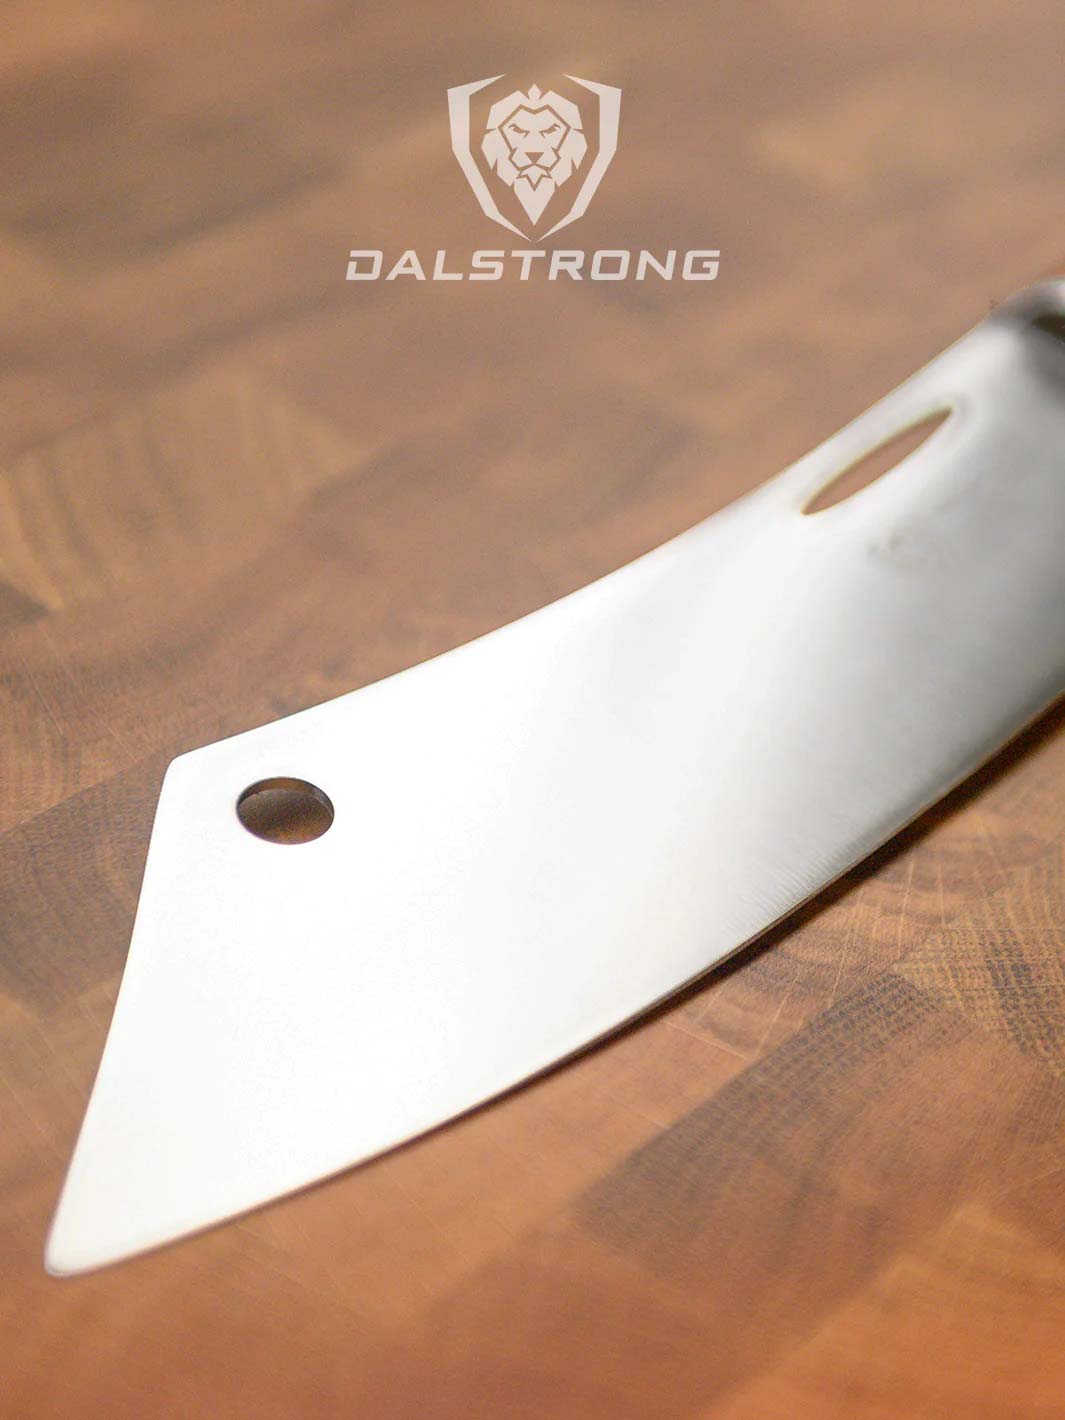 Dalstrong centurion series 8 inch crixus cleaver knife with black handle featuring it's blade.